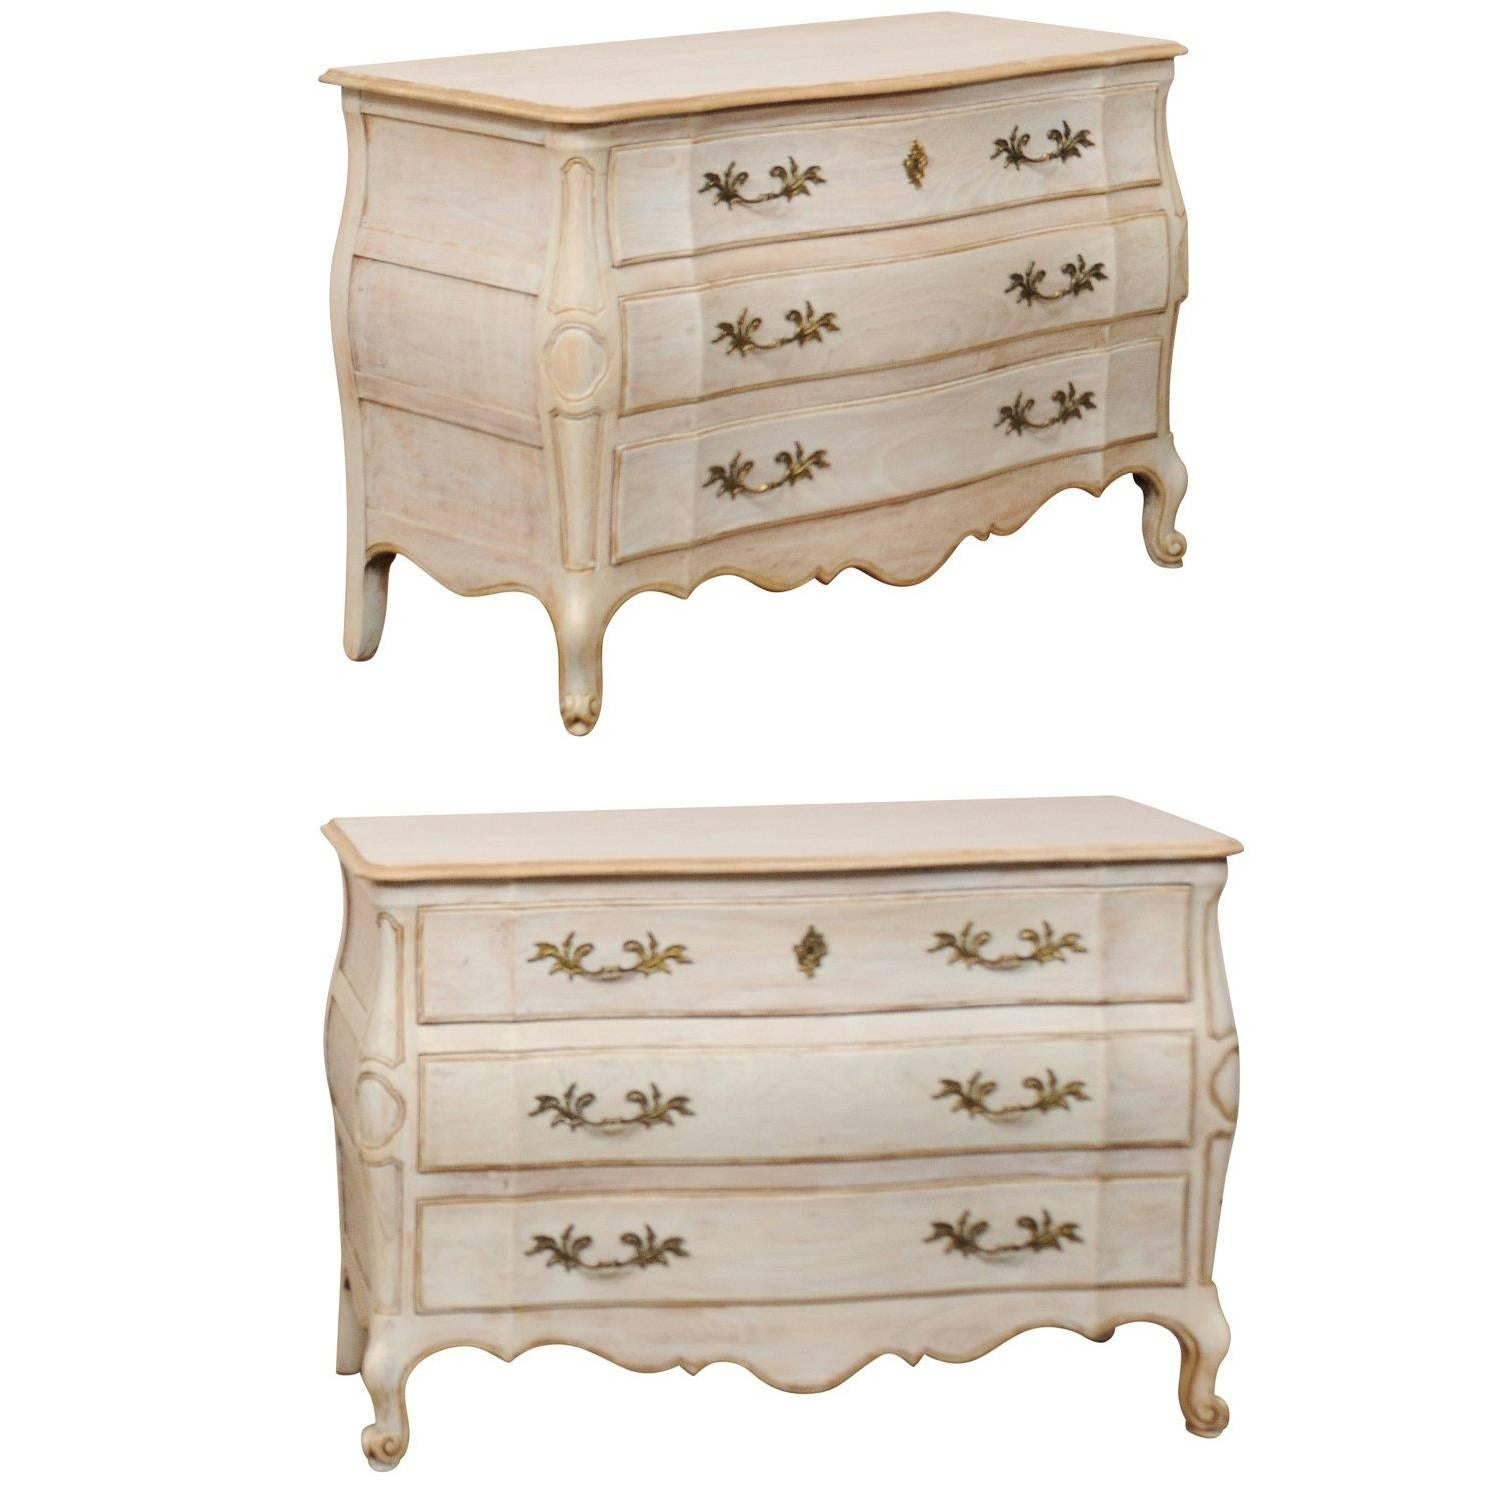 Pair of Mid-20th C. Painted Wood Bombé Style Chest of Drawers w/Scalloped Skirts